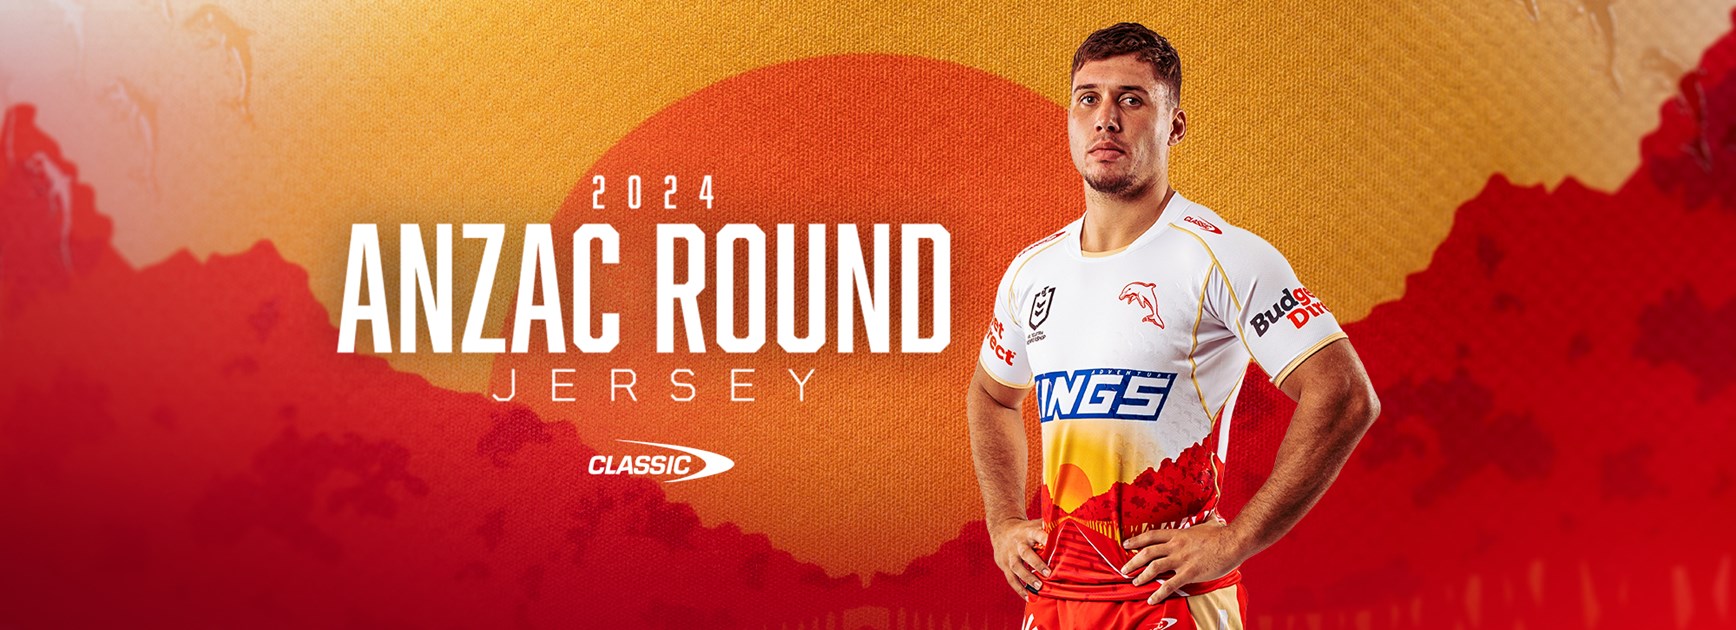 ANZAC Round jersey available for Member pre-sale